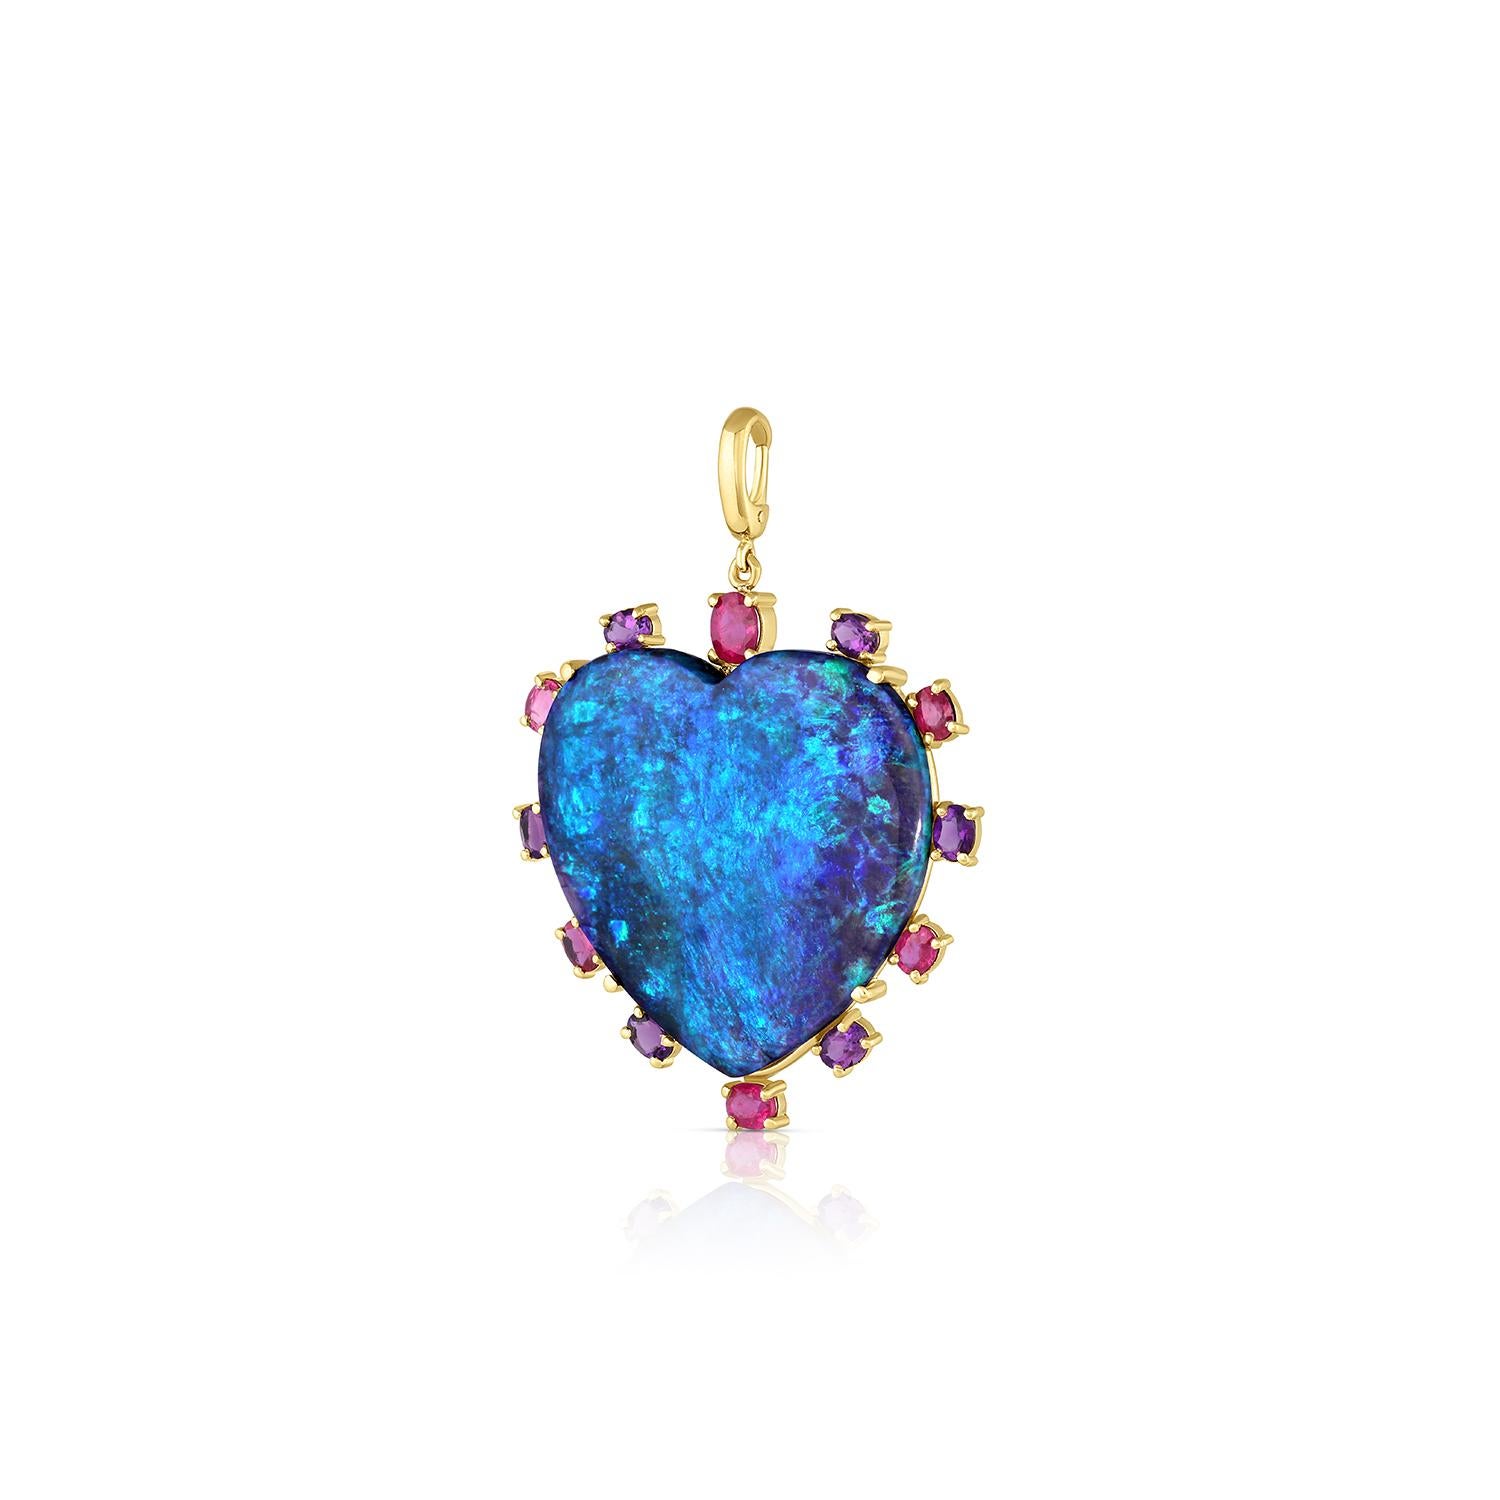 This beautiful charm boasts an bold Australian opal that's just under 25 carats, custom cut in a heart shape cabochon, surrounded by a mixture of hot pink/red rubies and purple amethyst. Hand fabricated in rich 18 karat yellow gold in Los Angeles,